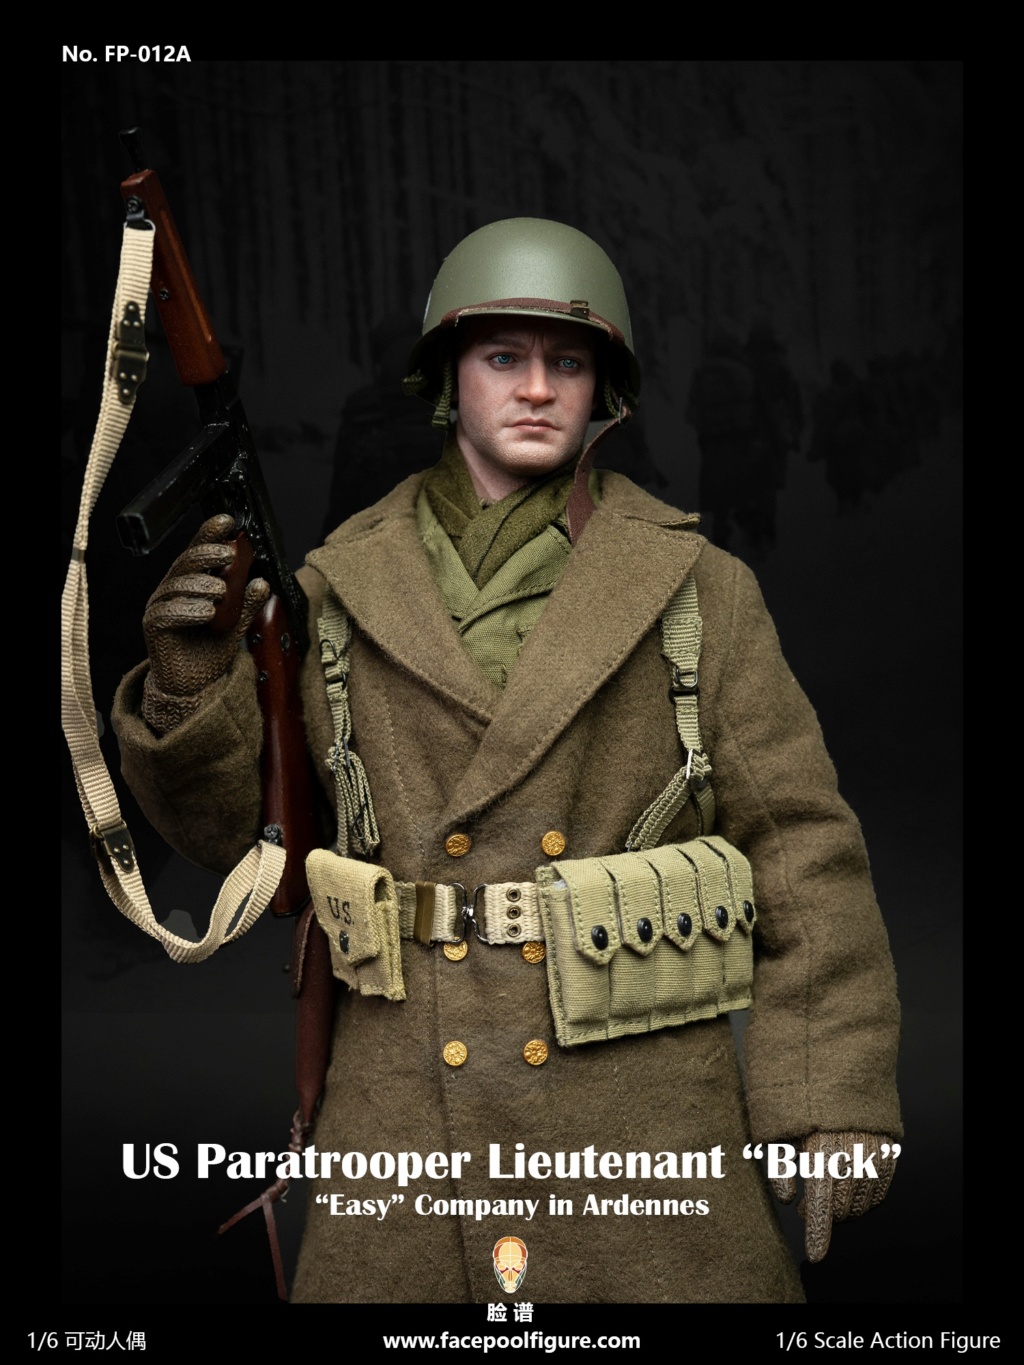 USParatrooper - NEW PRODUCT: Facepool: 1/6 Scale US Paratrooper Lieutenant “Buck” (FP012A & B) (2 versions) 10140010